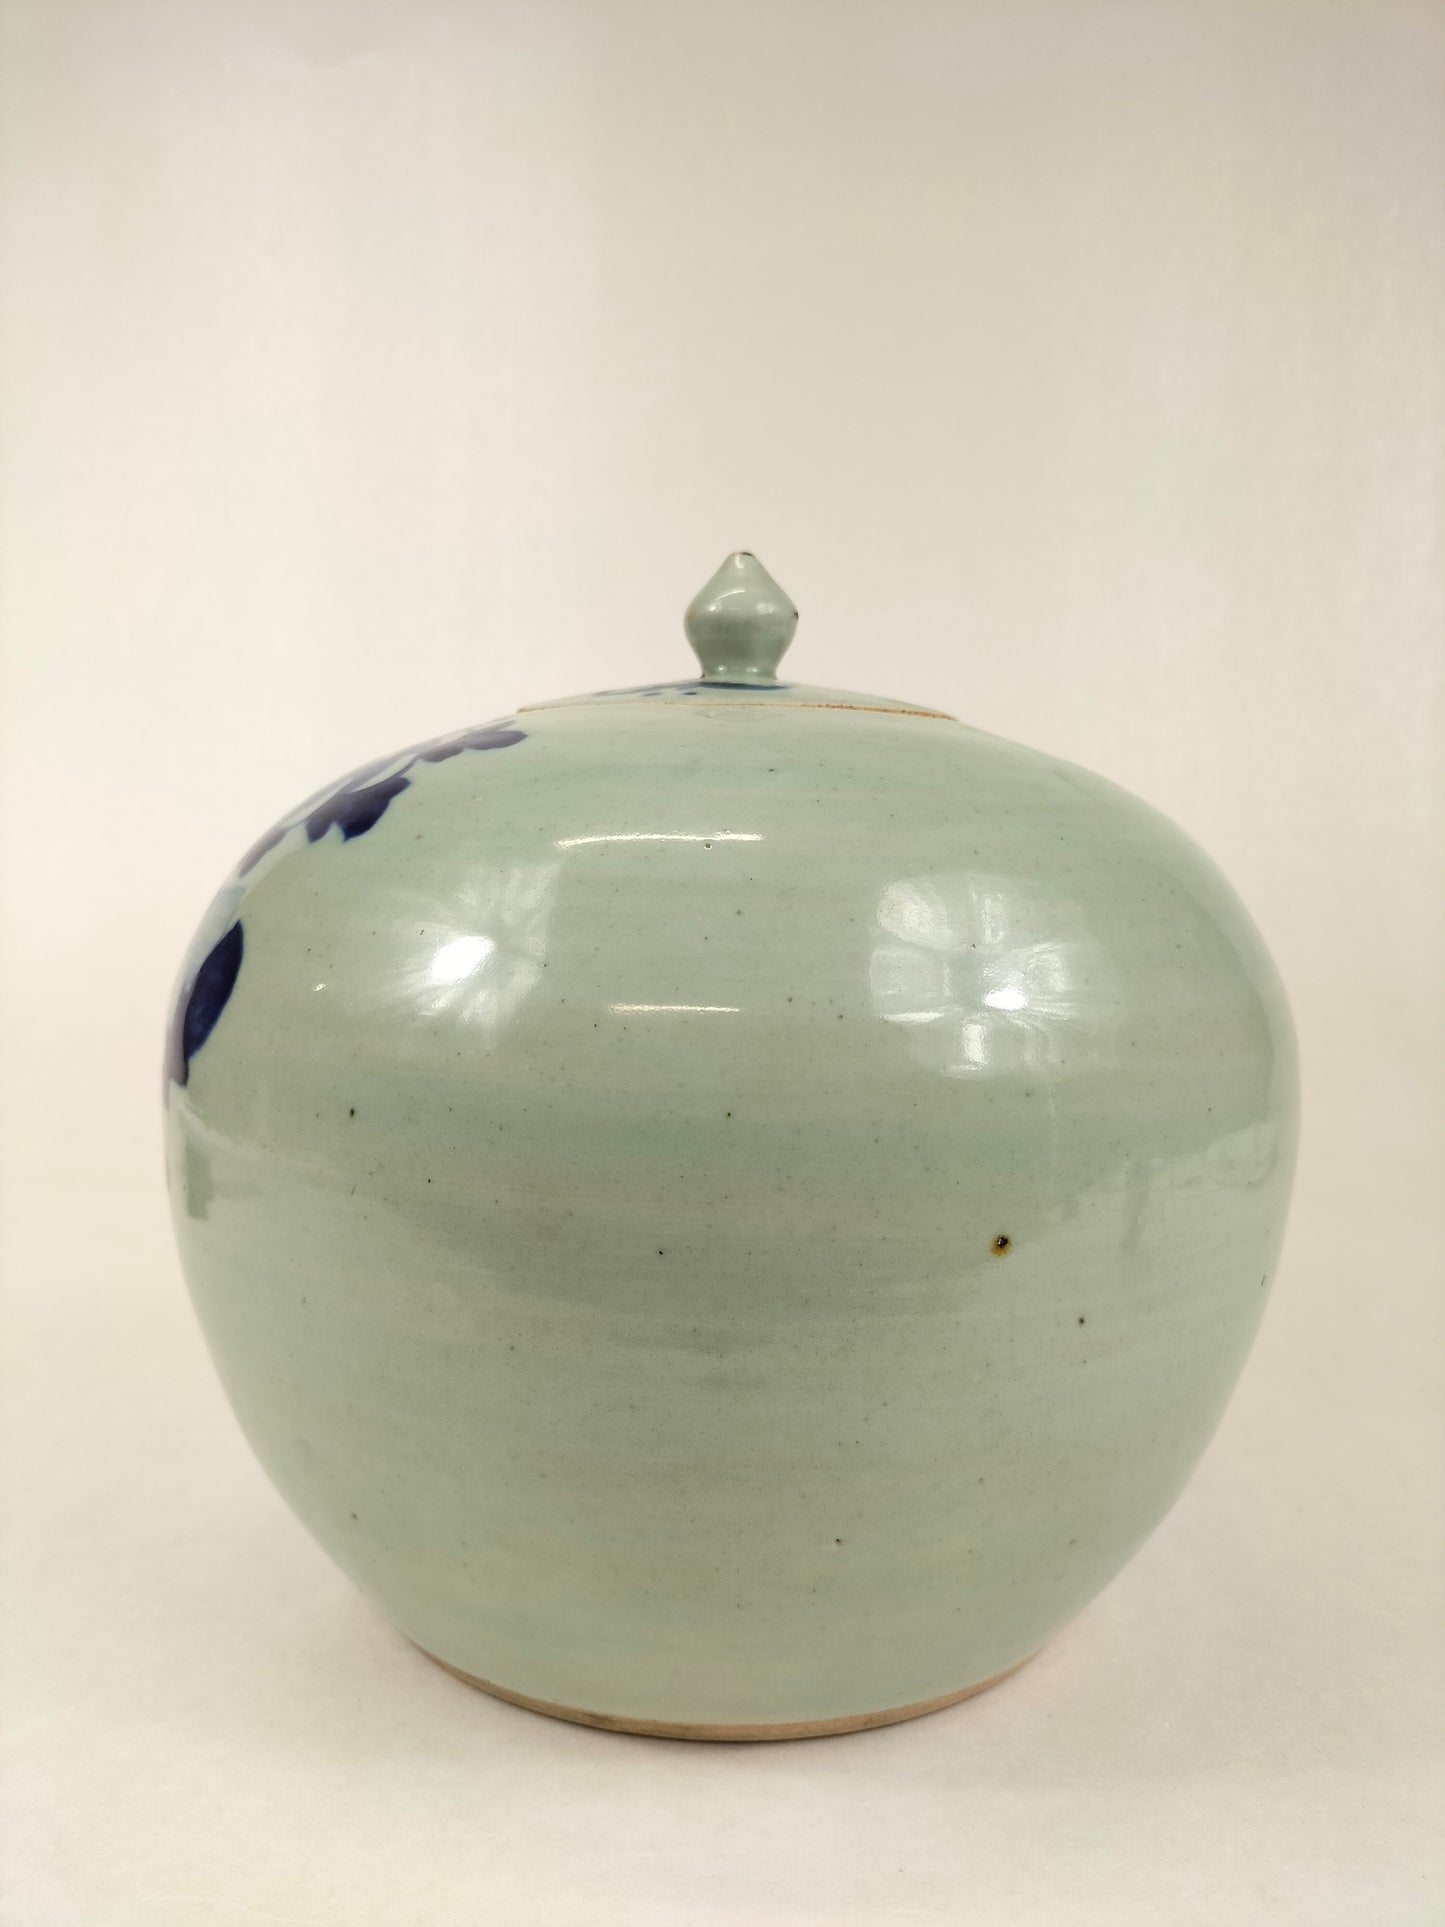 Antique Chinese celadon ginger jar decorated with peacock and flowers // Qing Dynasty - 19th century